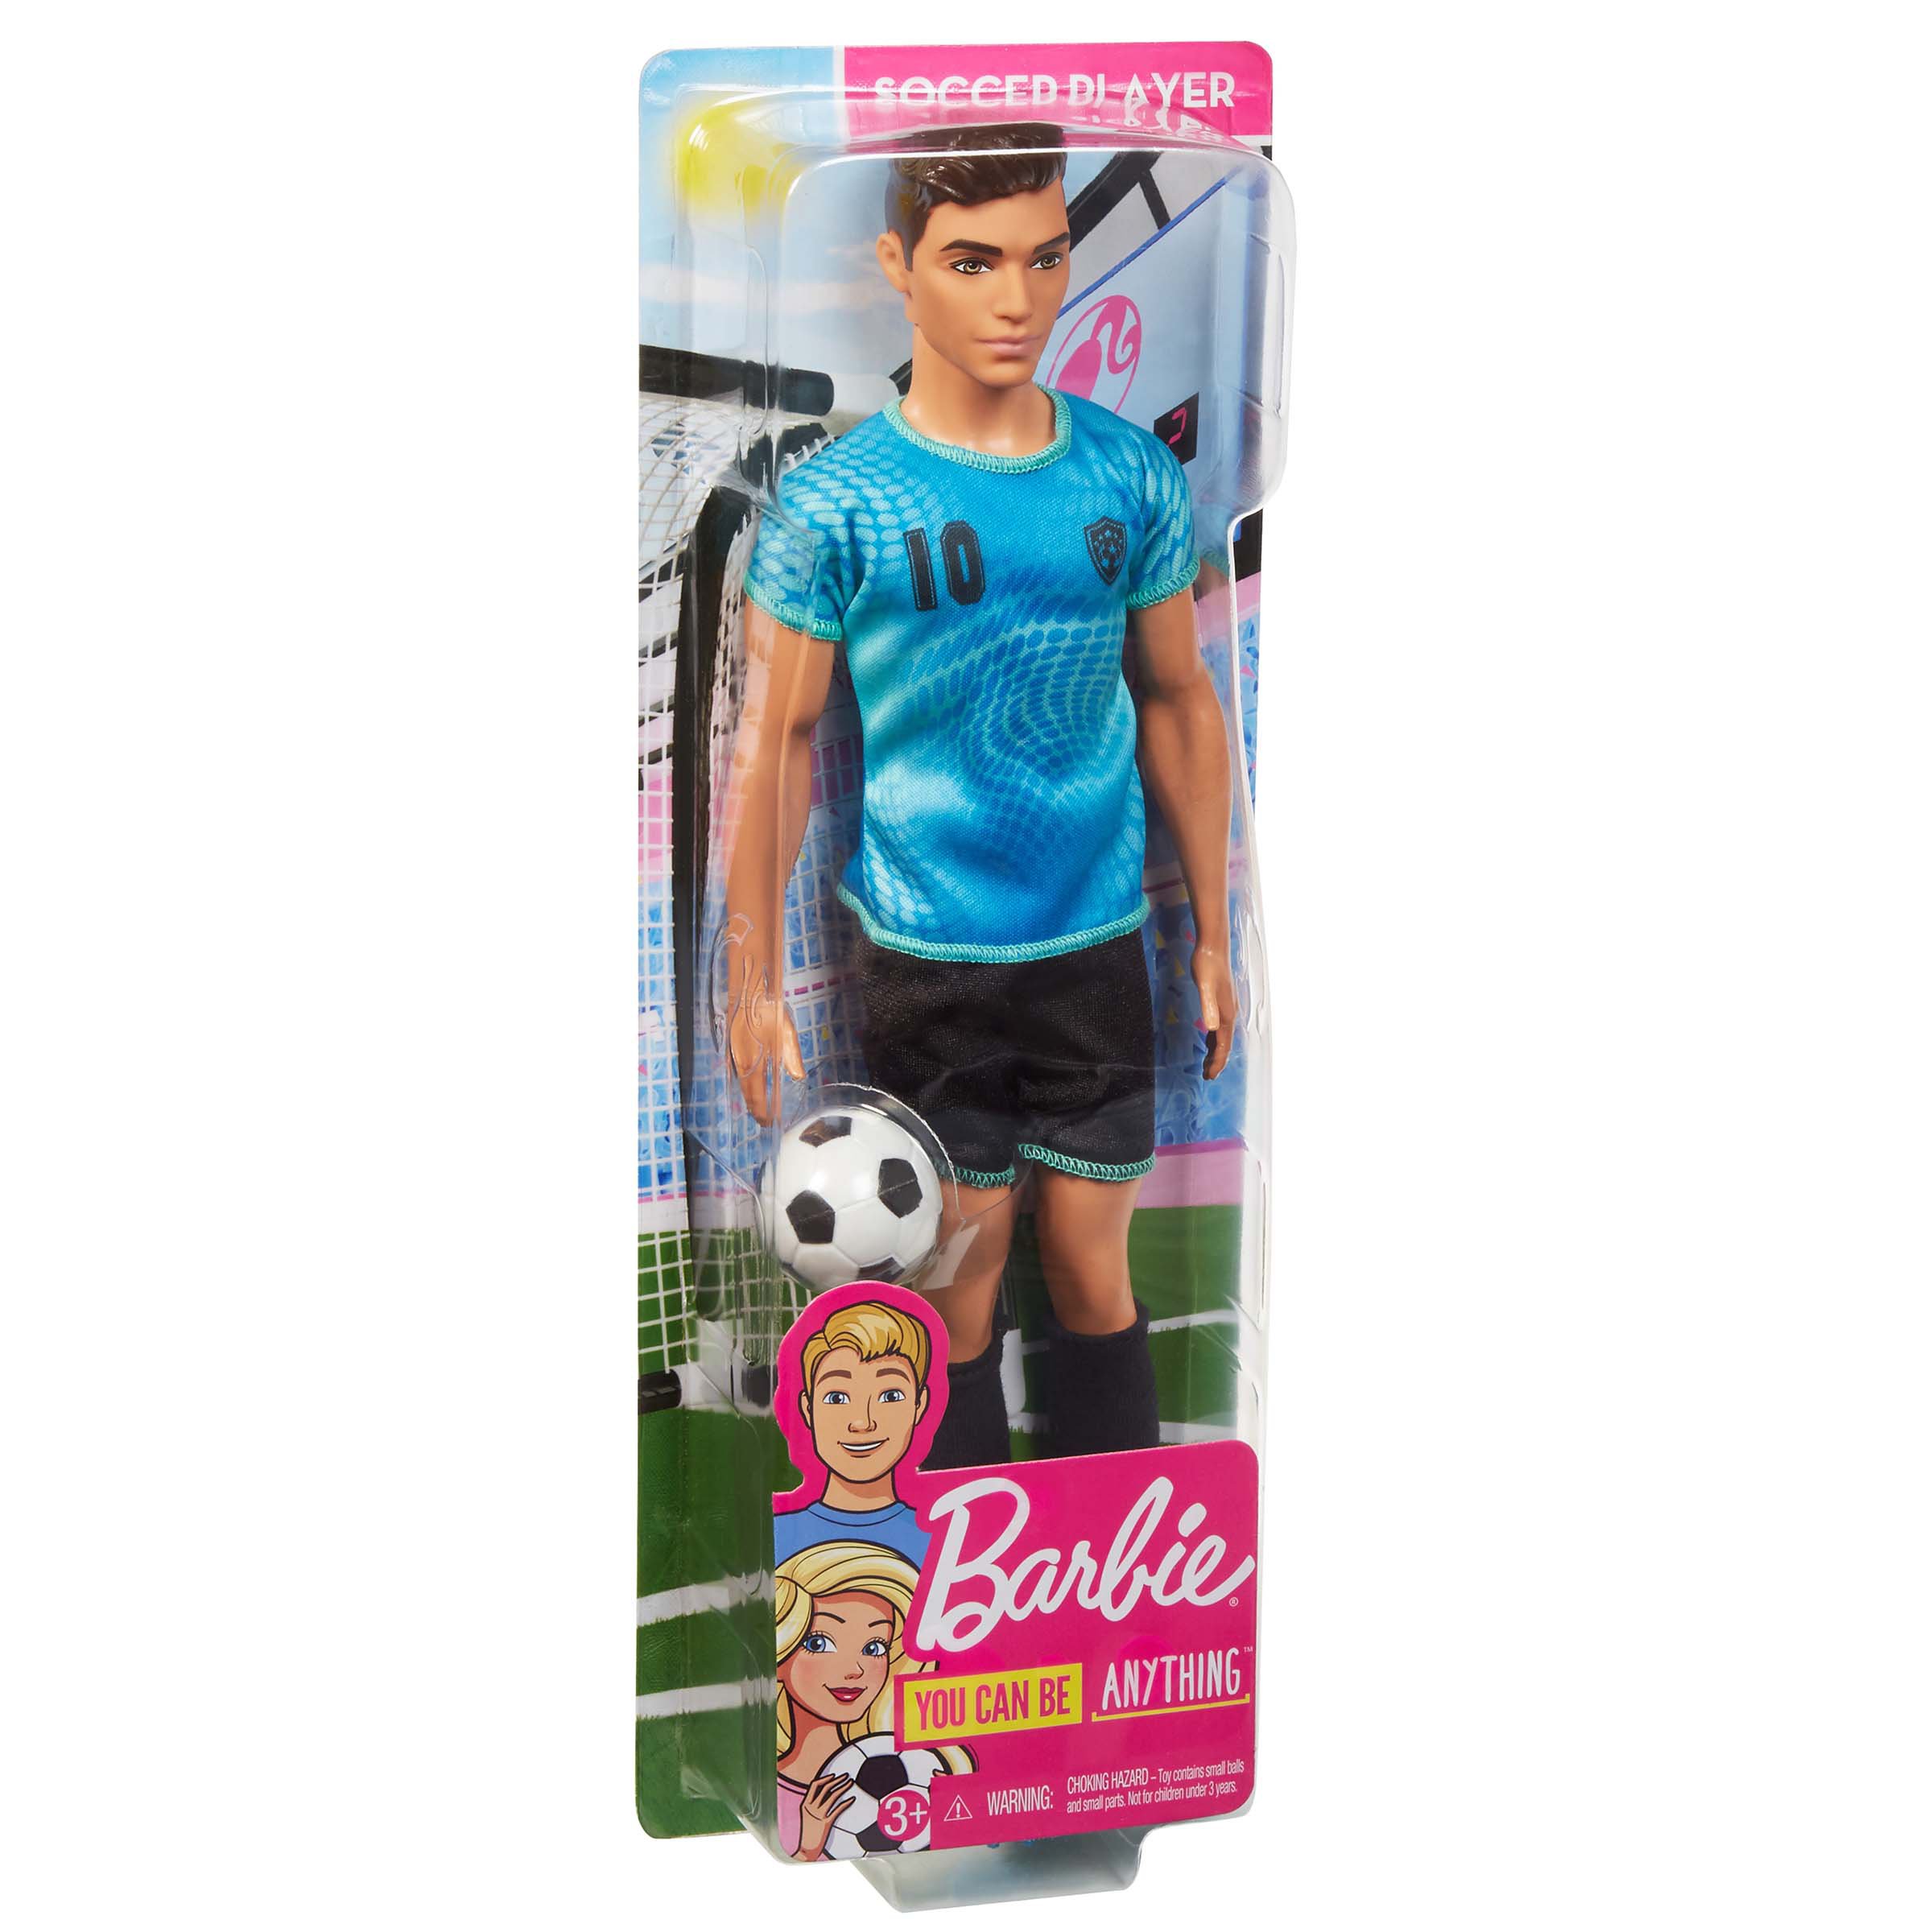 Opknappen schroot Zogenaamd Barbie You Can Be Anything Soccer Ken Doll - Shop Toys at H-E-B